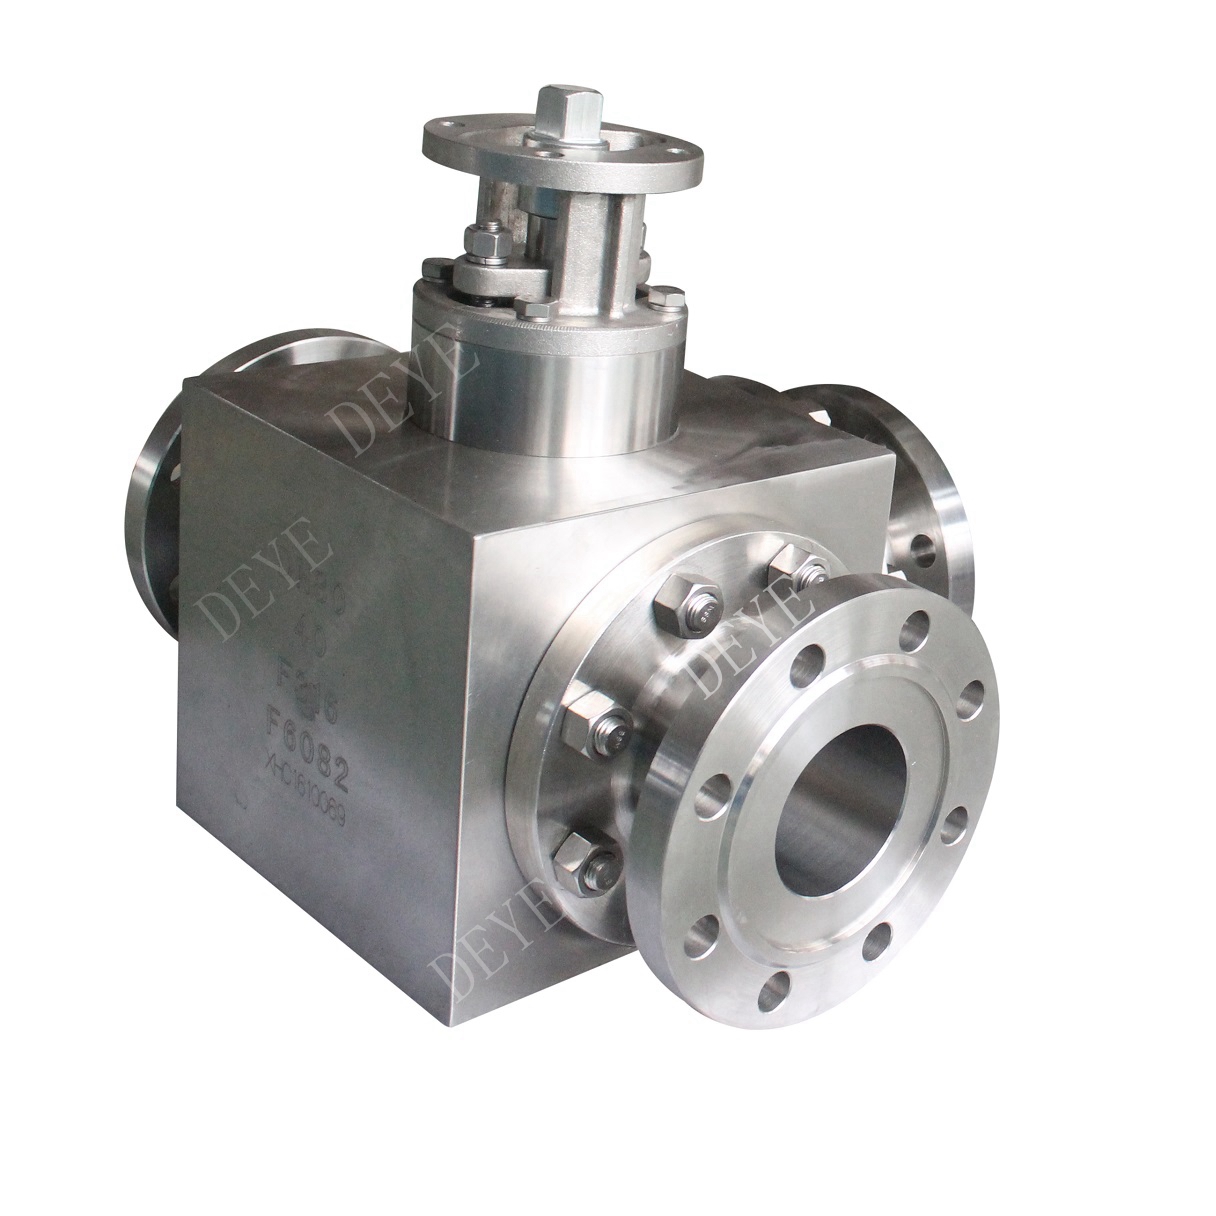 Hot-selling Psb Valve -
  300LBS stainless steel 3-way ball valve with Flanged ends – Deye